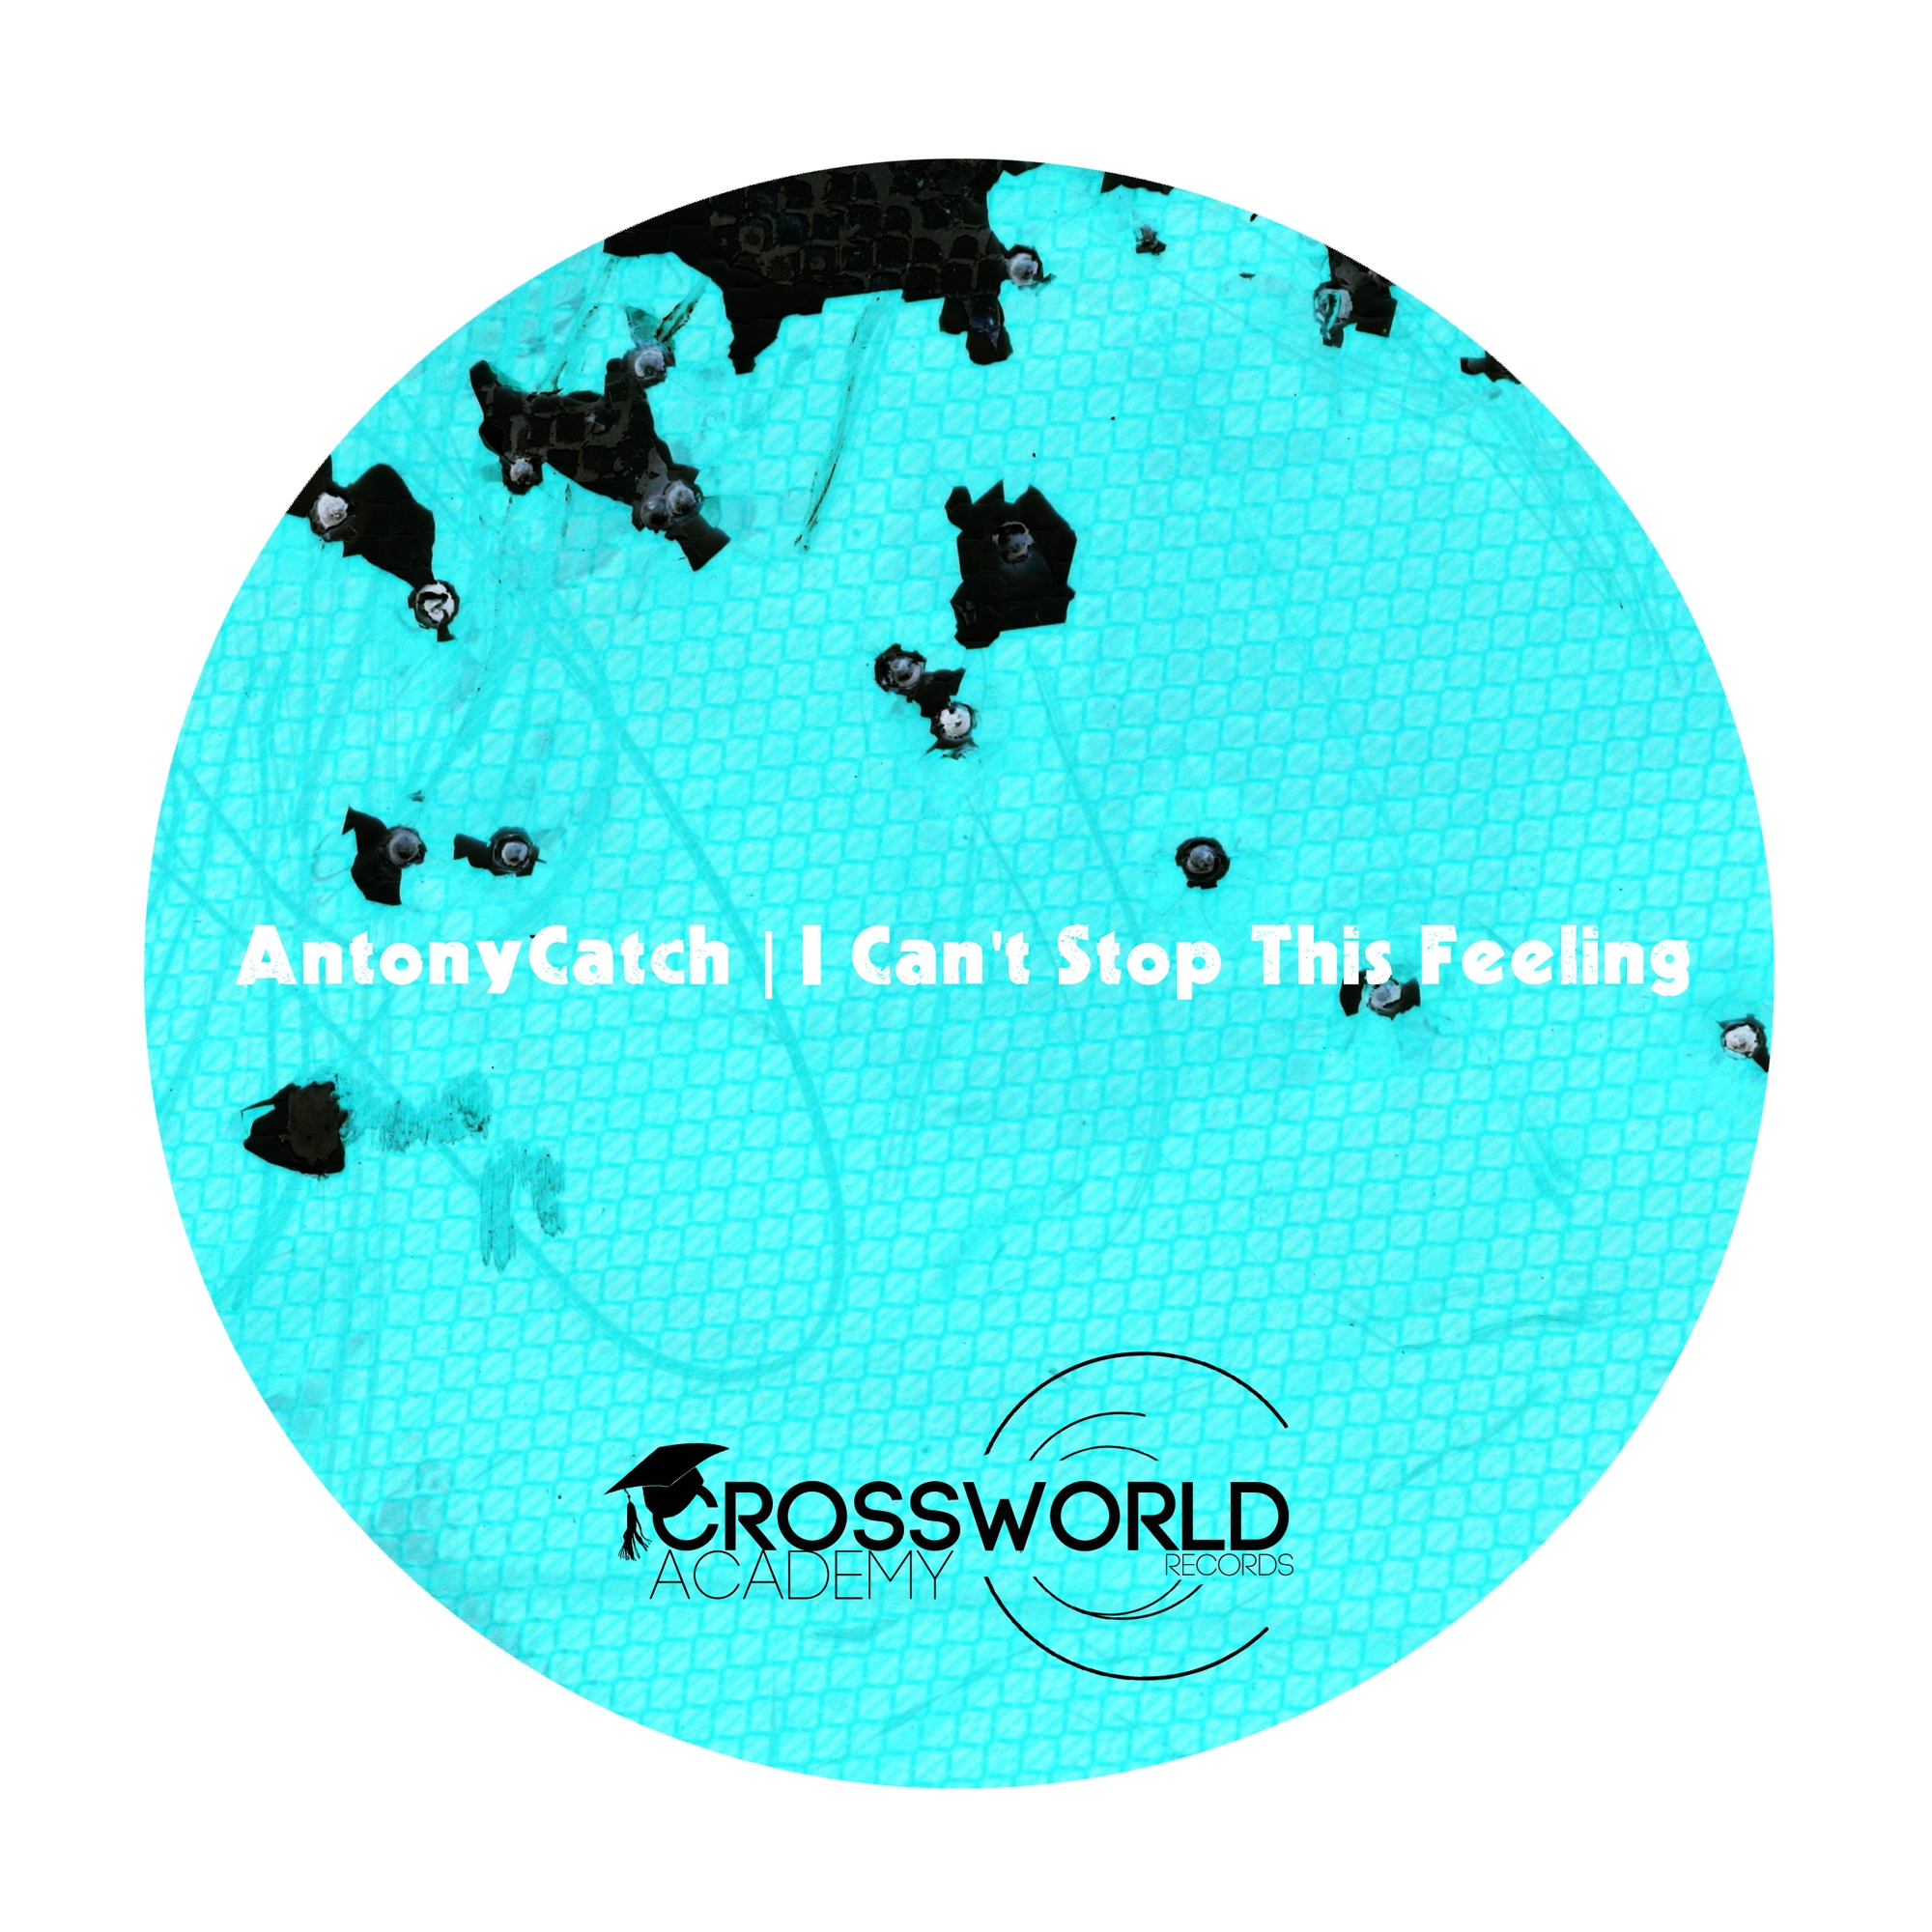 I can't stop this feeling. This feeling Original track. I can't stop this feeling this feeling. Flashtronica - i cant stop.